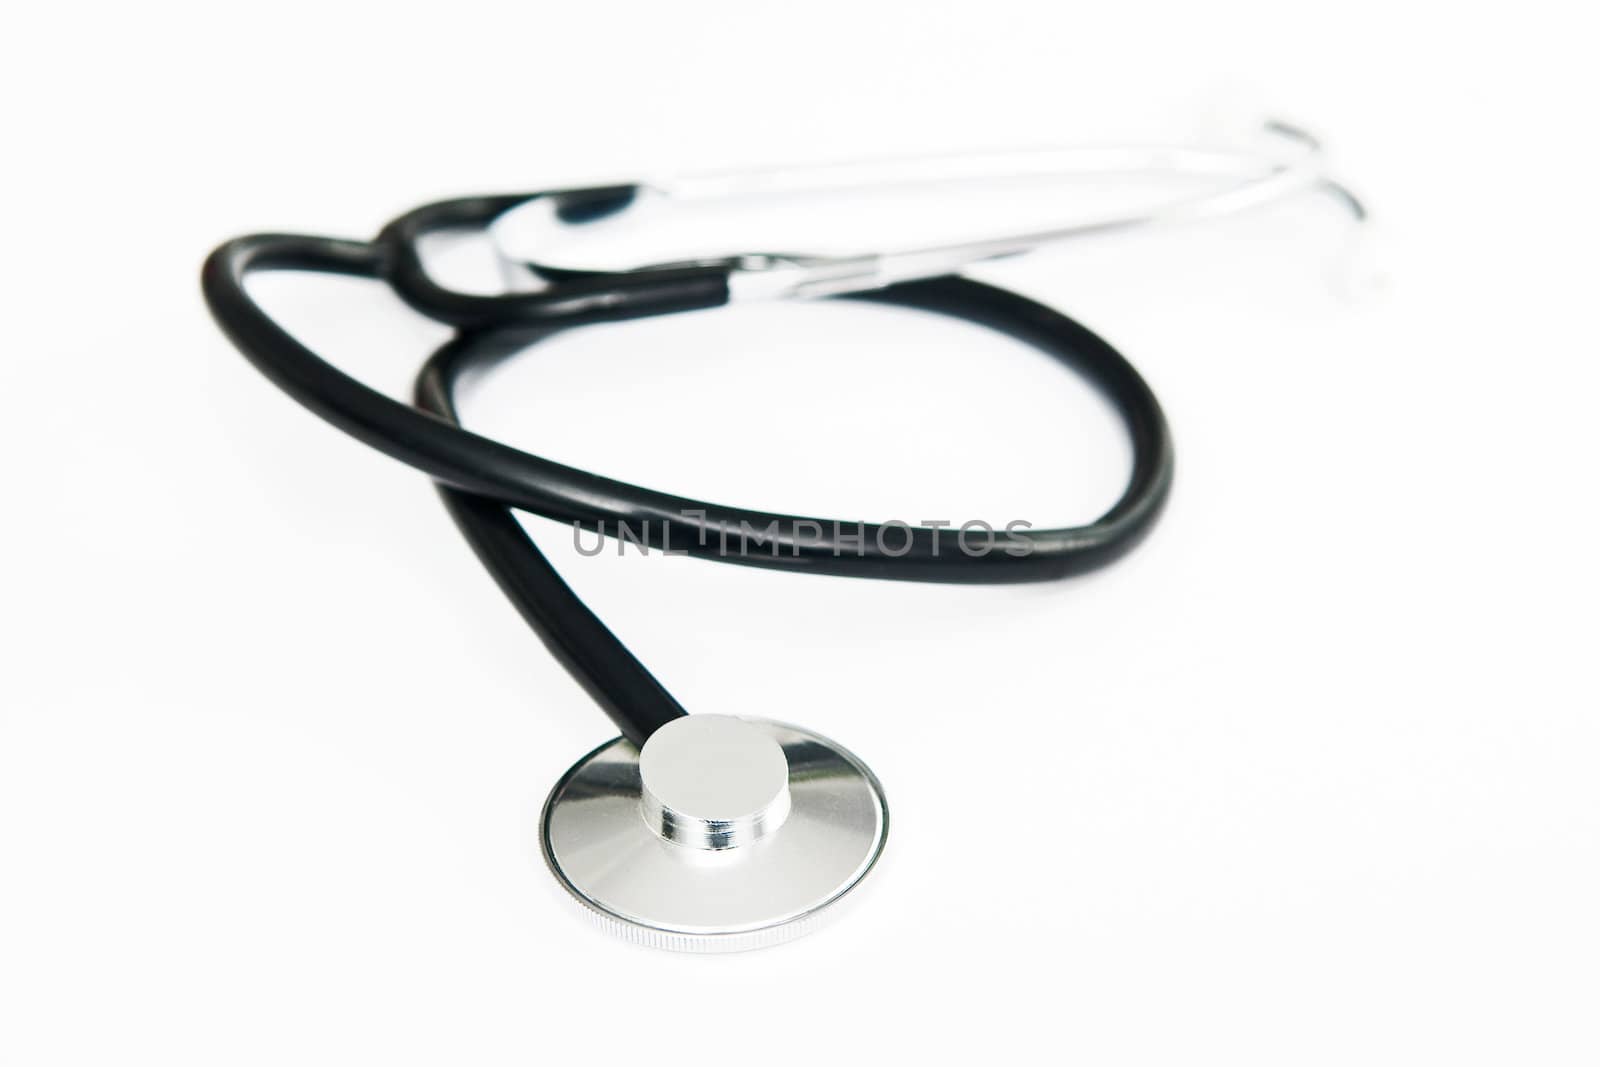 A  stethoscope on the white